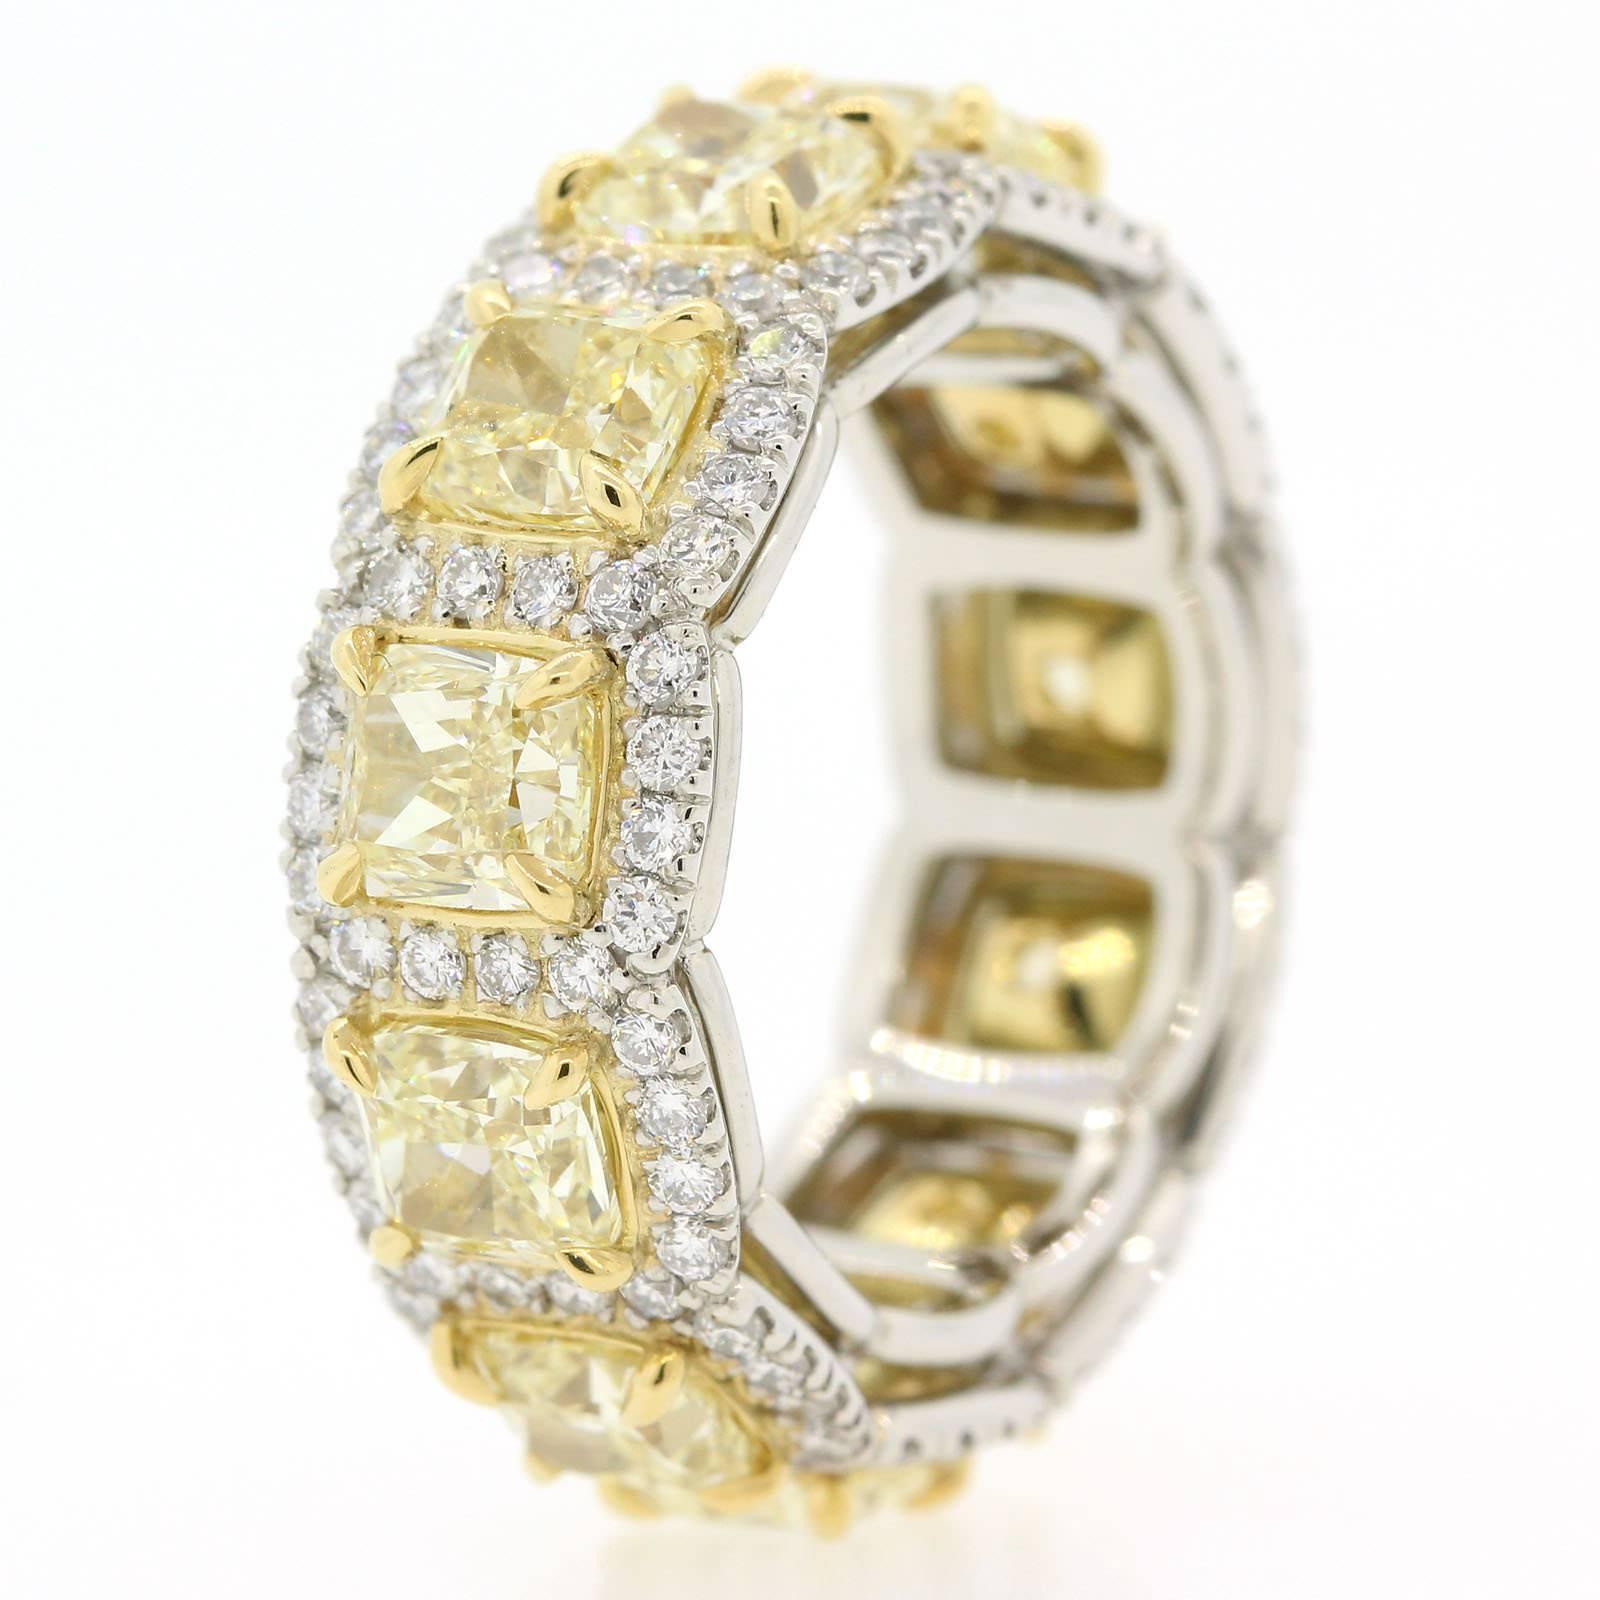 This is an eye popping ring!  The band is beautifully hand crafted in 18KT white gold and brilliantly set with 6.16 carats of Fancy Yellow Radiant Cut Diamonds of VS1 clarity.  To add more brilliancy the ring is accented with 1.23 carats of Round